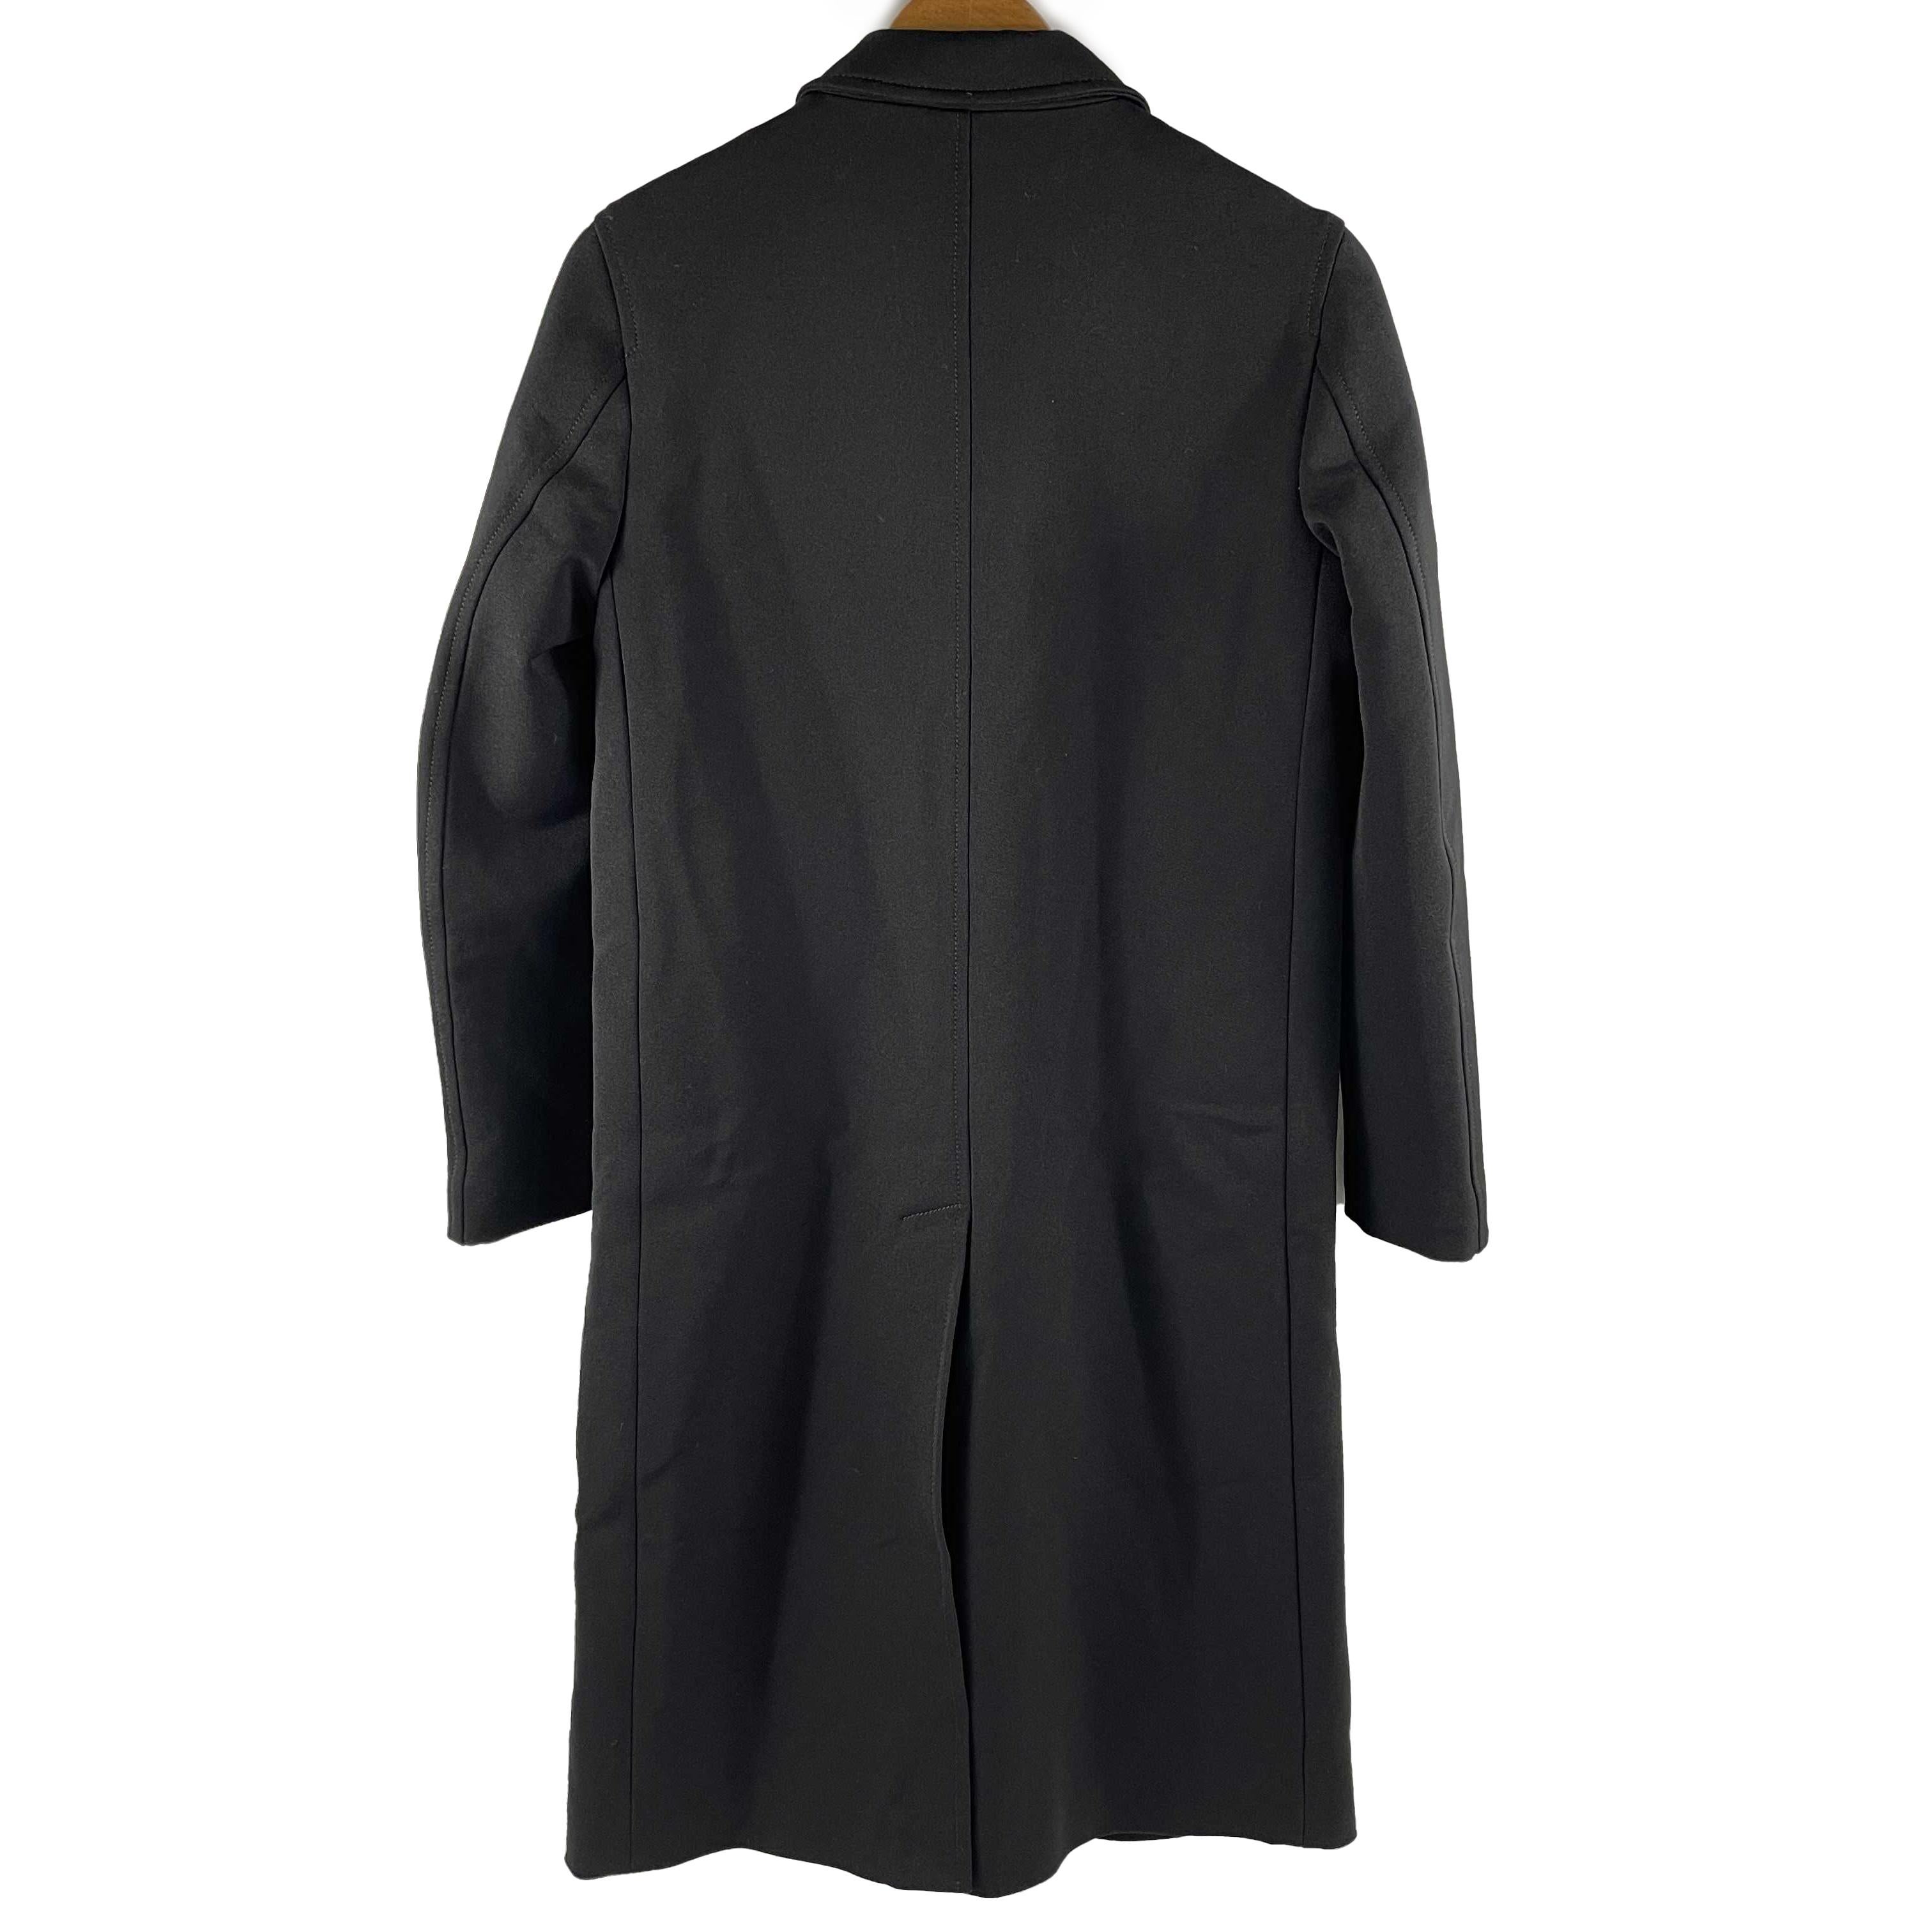 Prada - Excellent - Nylon Double Pocket Long Overcoat - Black - 38- US 2 - Jacket

Description

This Prada overcoat is crafted with a black nylon, polyester, and elastane blend and a black quilted stitched viscose interior lining.
The frontside